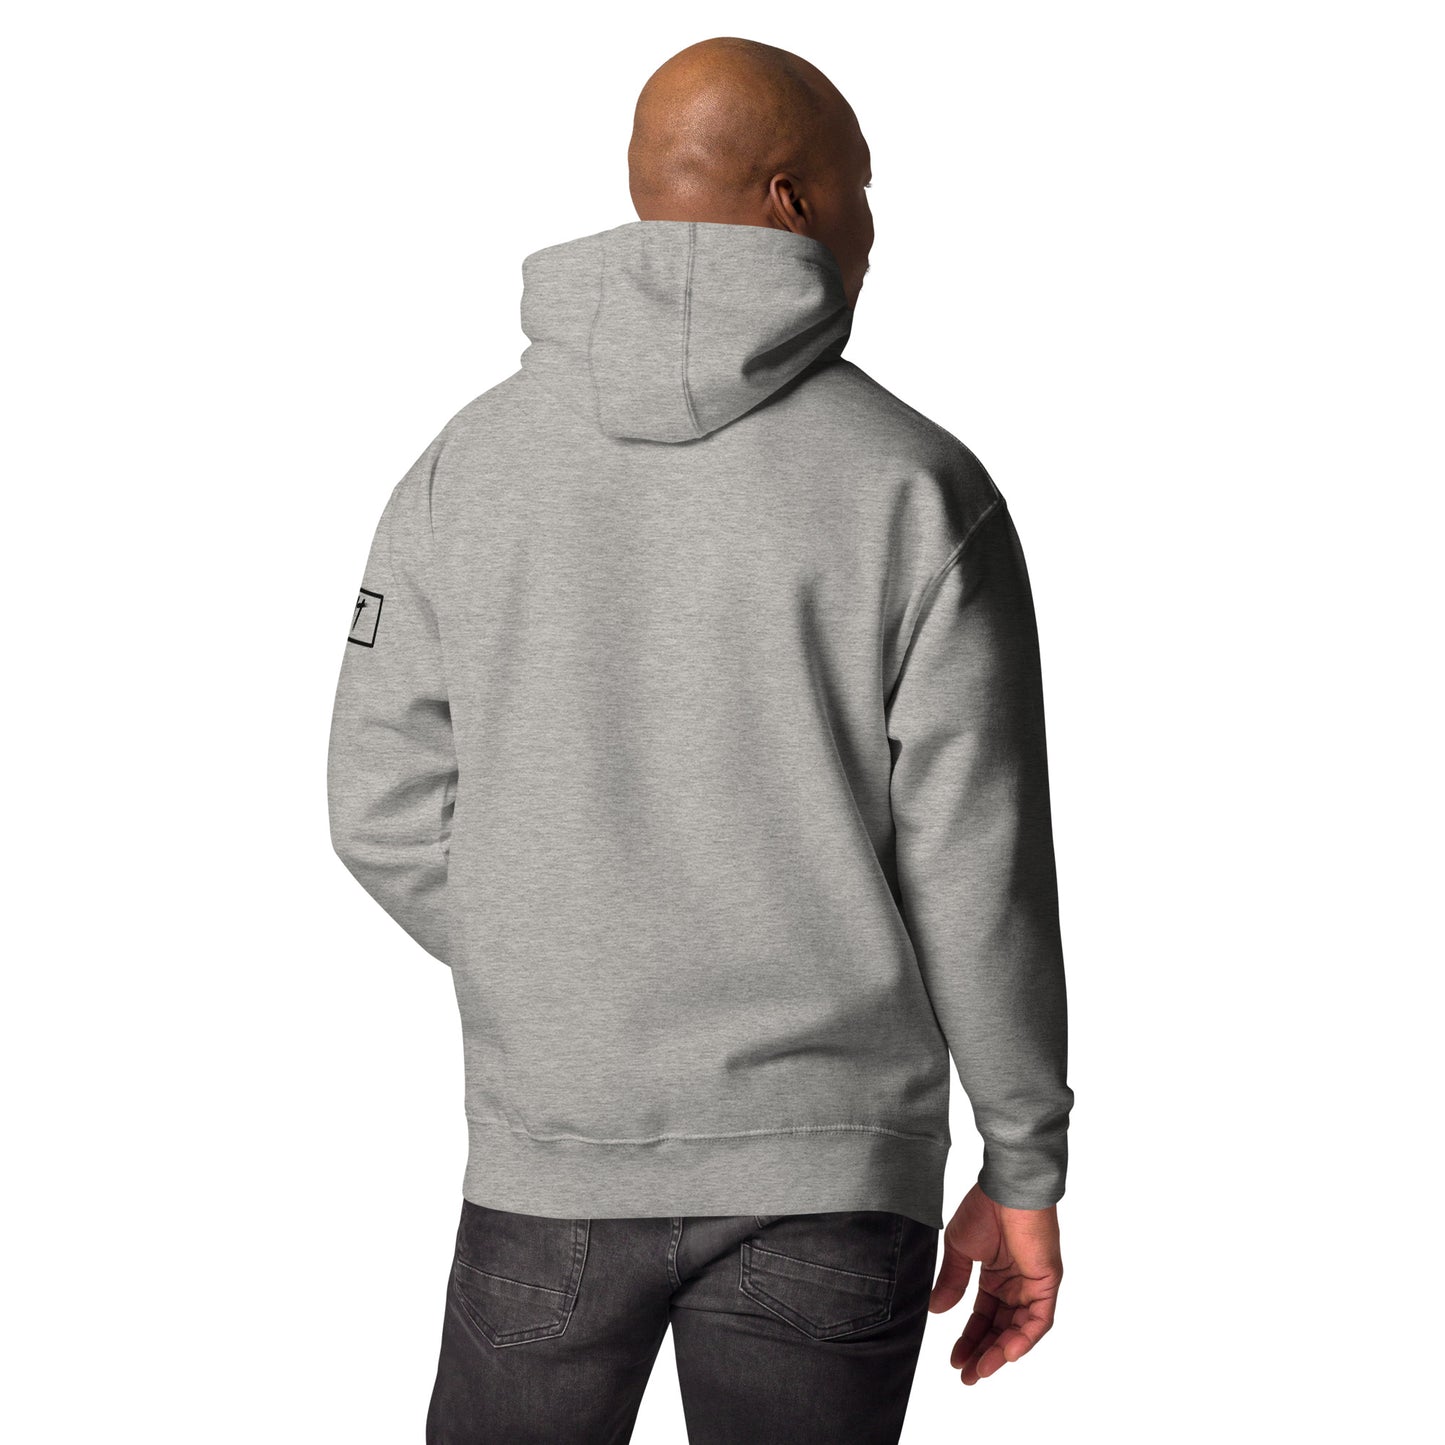 Back-Side view of Storm Castle Peak in Custer Gallatin National Forest Montana Carbon Grey Hoodies for Men from Park Attire